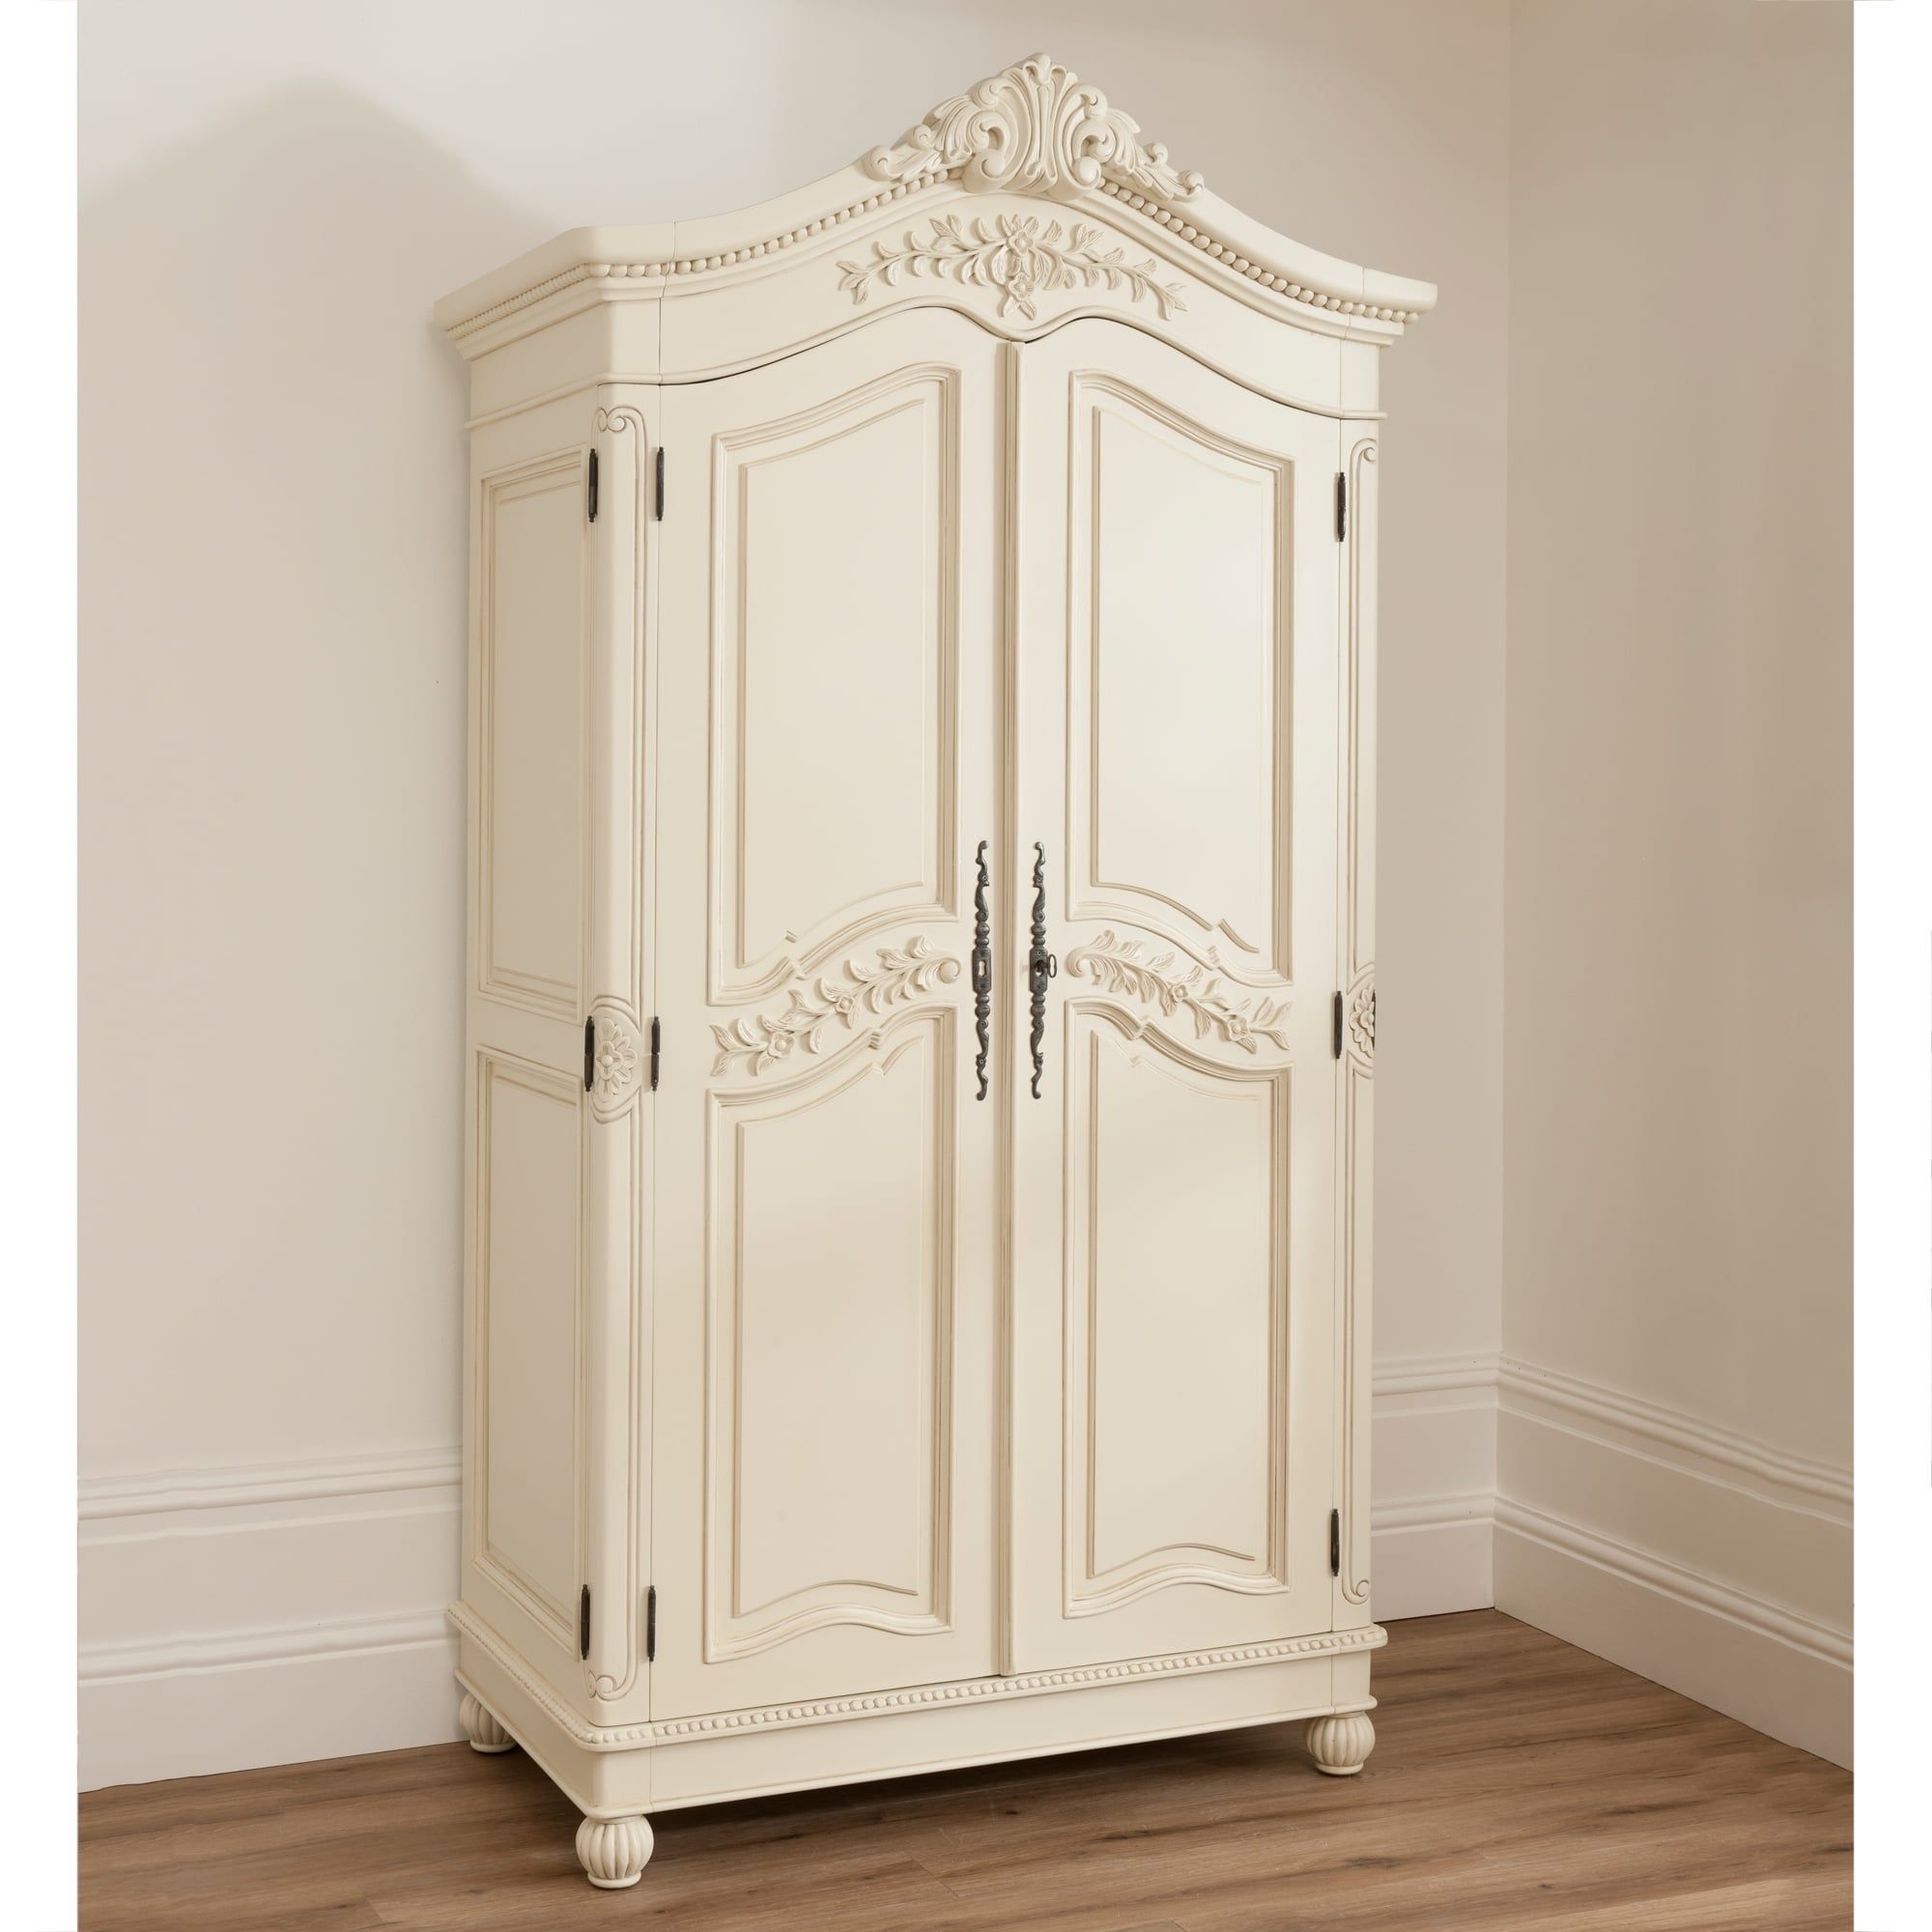 Shabby Chic Wardrobe For Your New Modern Lifestyle – Darbylanefurniture  | Shabby Chic Wardrobe, Shabby Chic Bathroom, Shabby Chic Curtains With Shabby Chic Wardrobes (Photo 4 of 15)